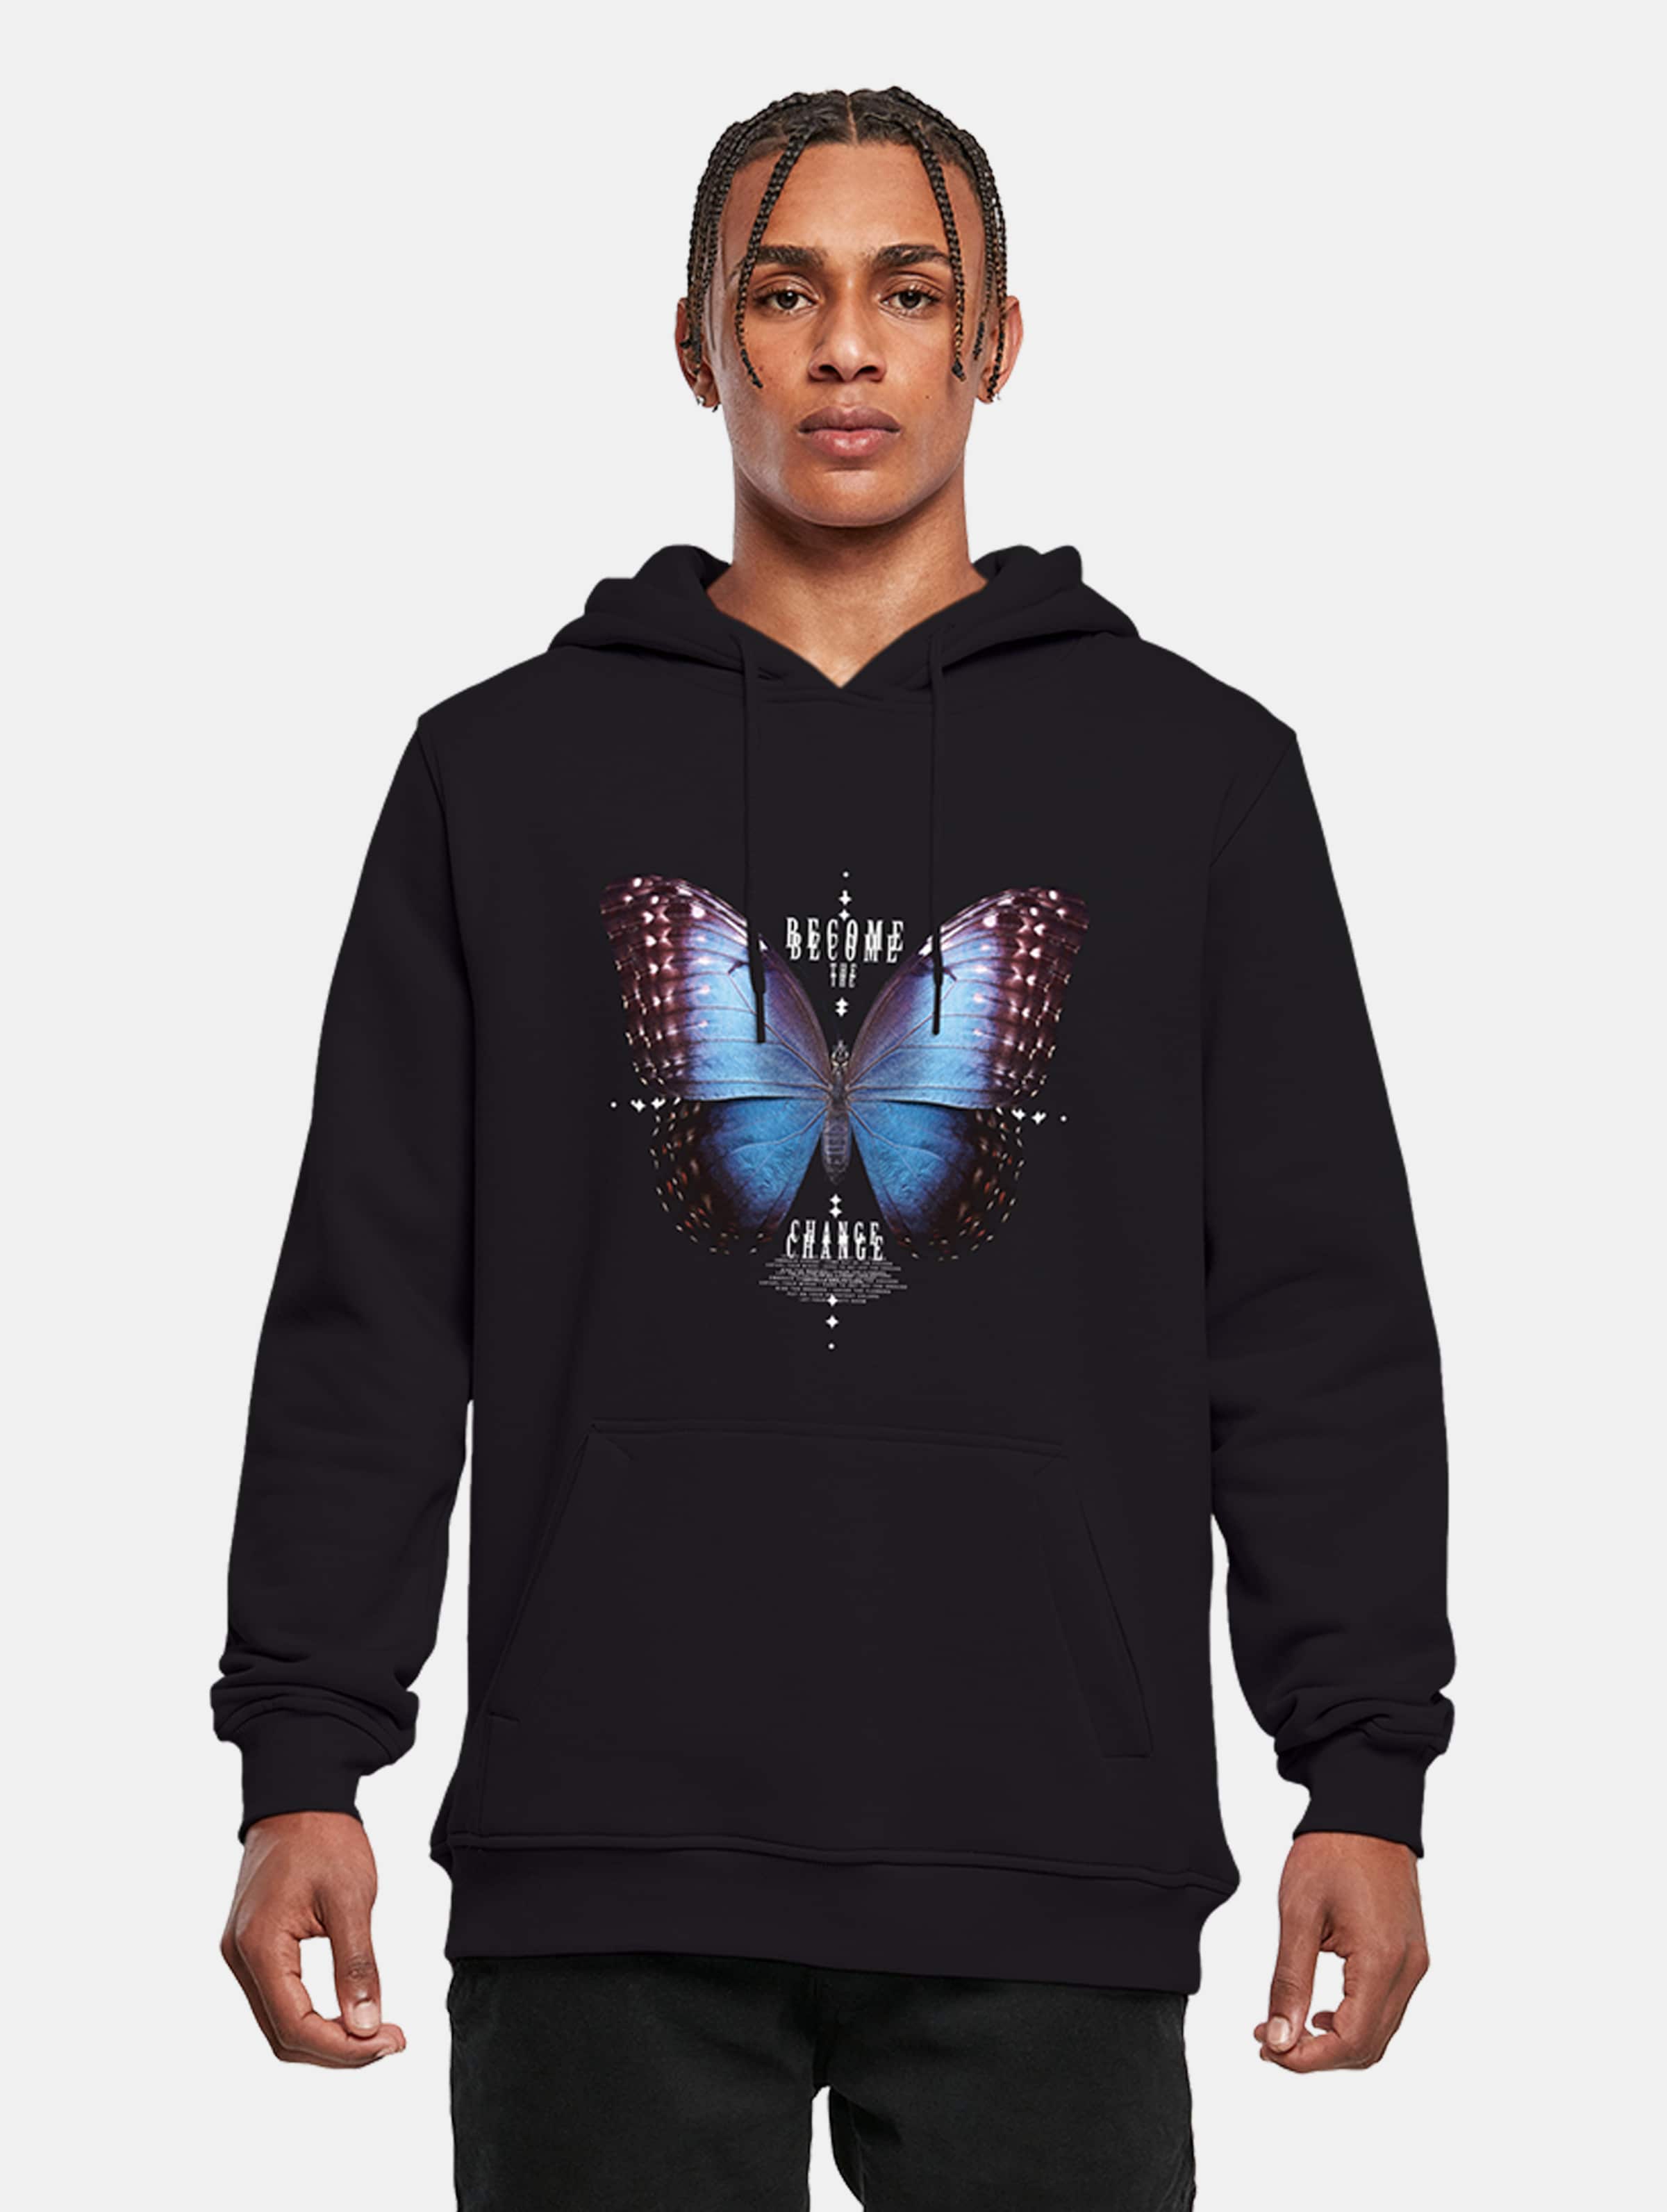 Mister Tee - Become The Change Butterfly Hoodie/trui - XS - Zwart